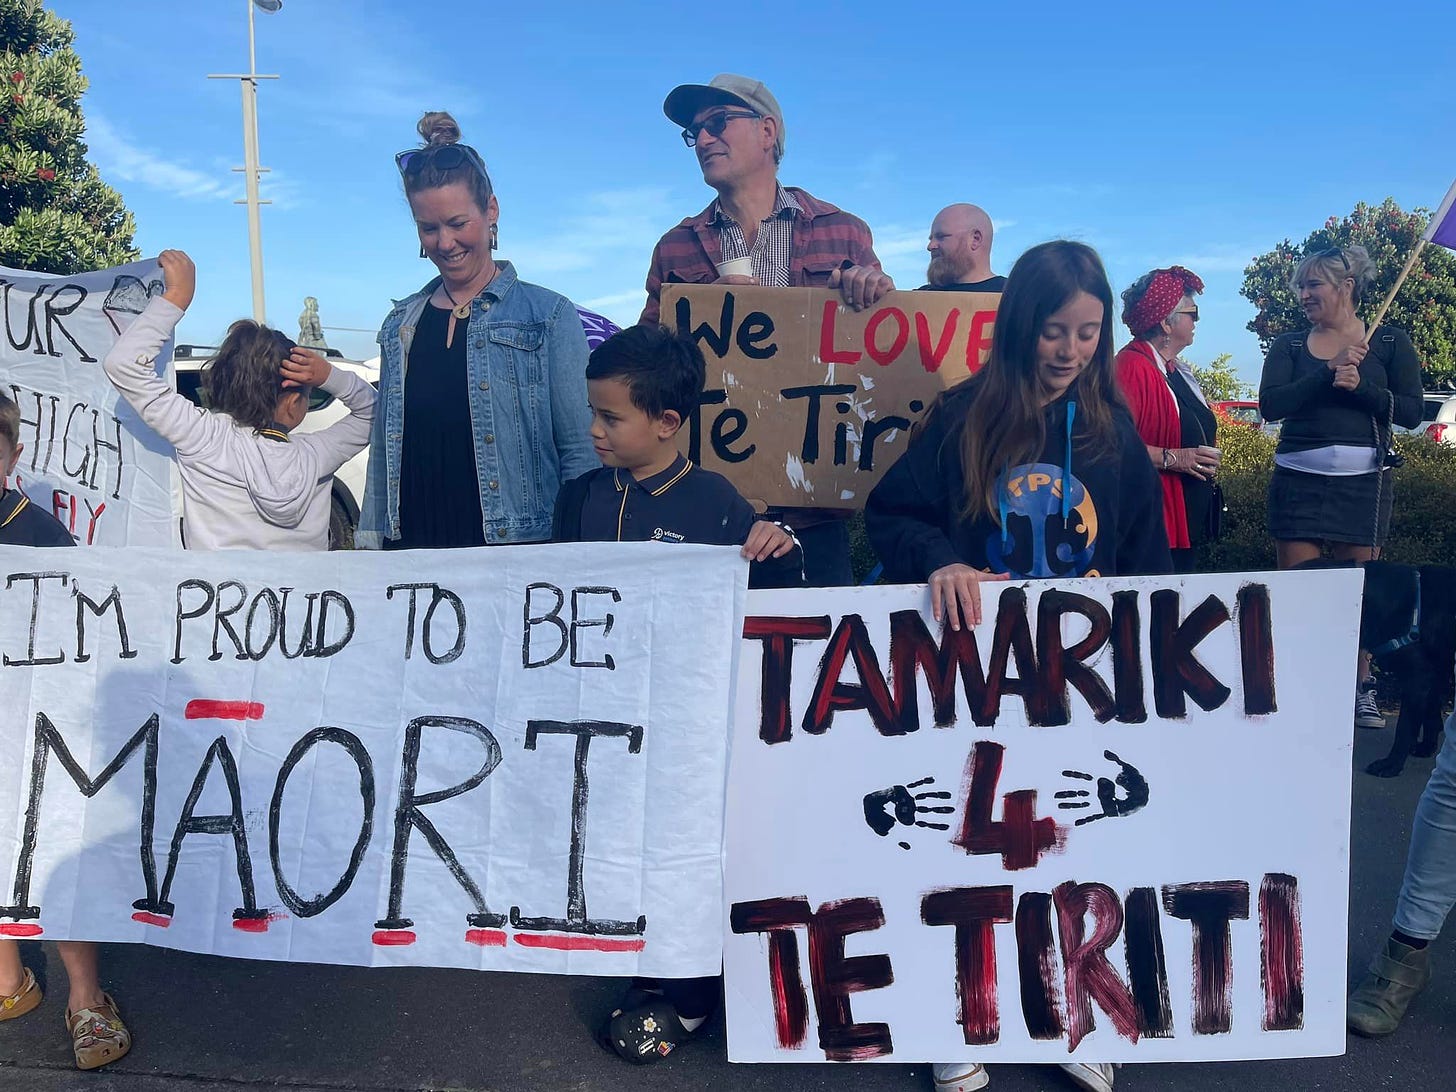 May be an image of 11 people and text that says "LOVE JR HICH ELY IM PROUD TO BE TAMARIKI MÃORI 沙 TE TIRITI"